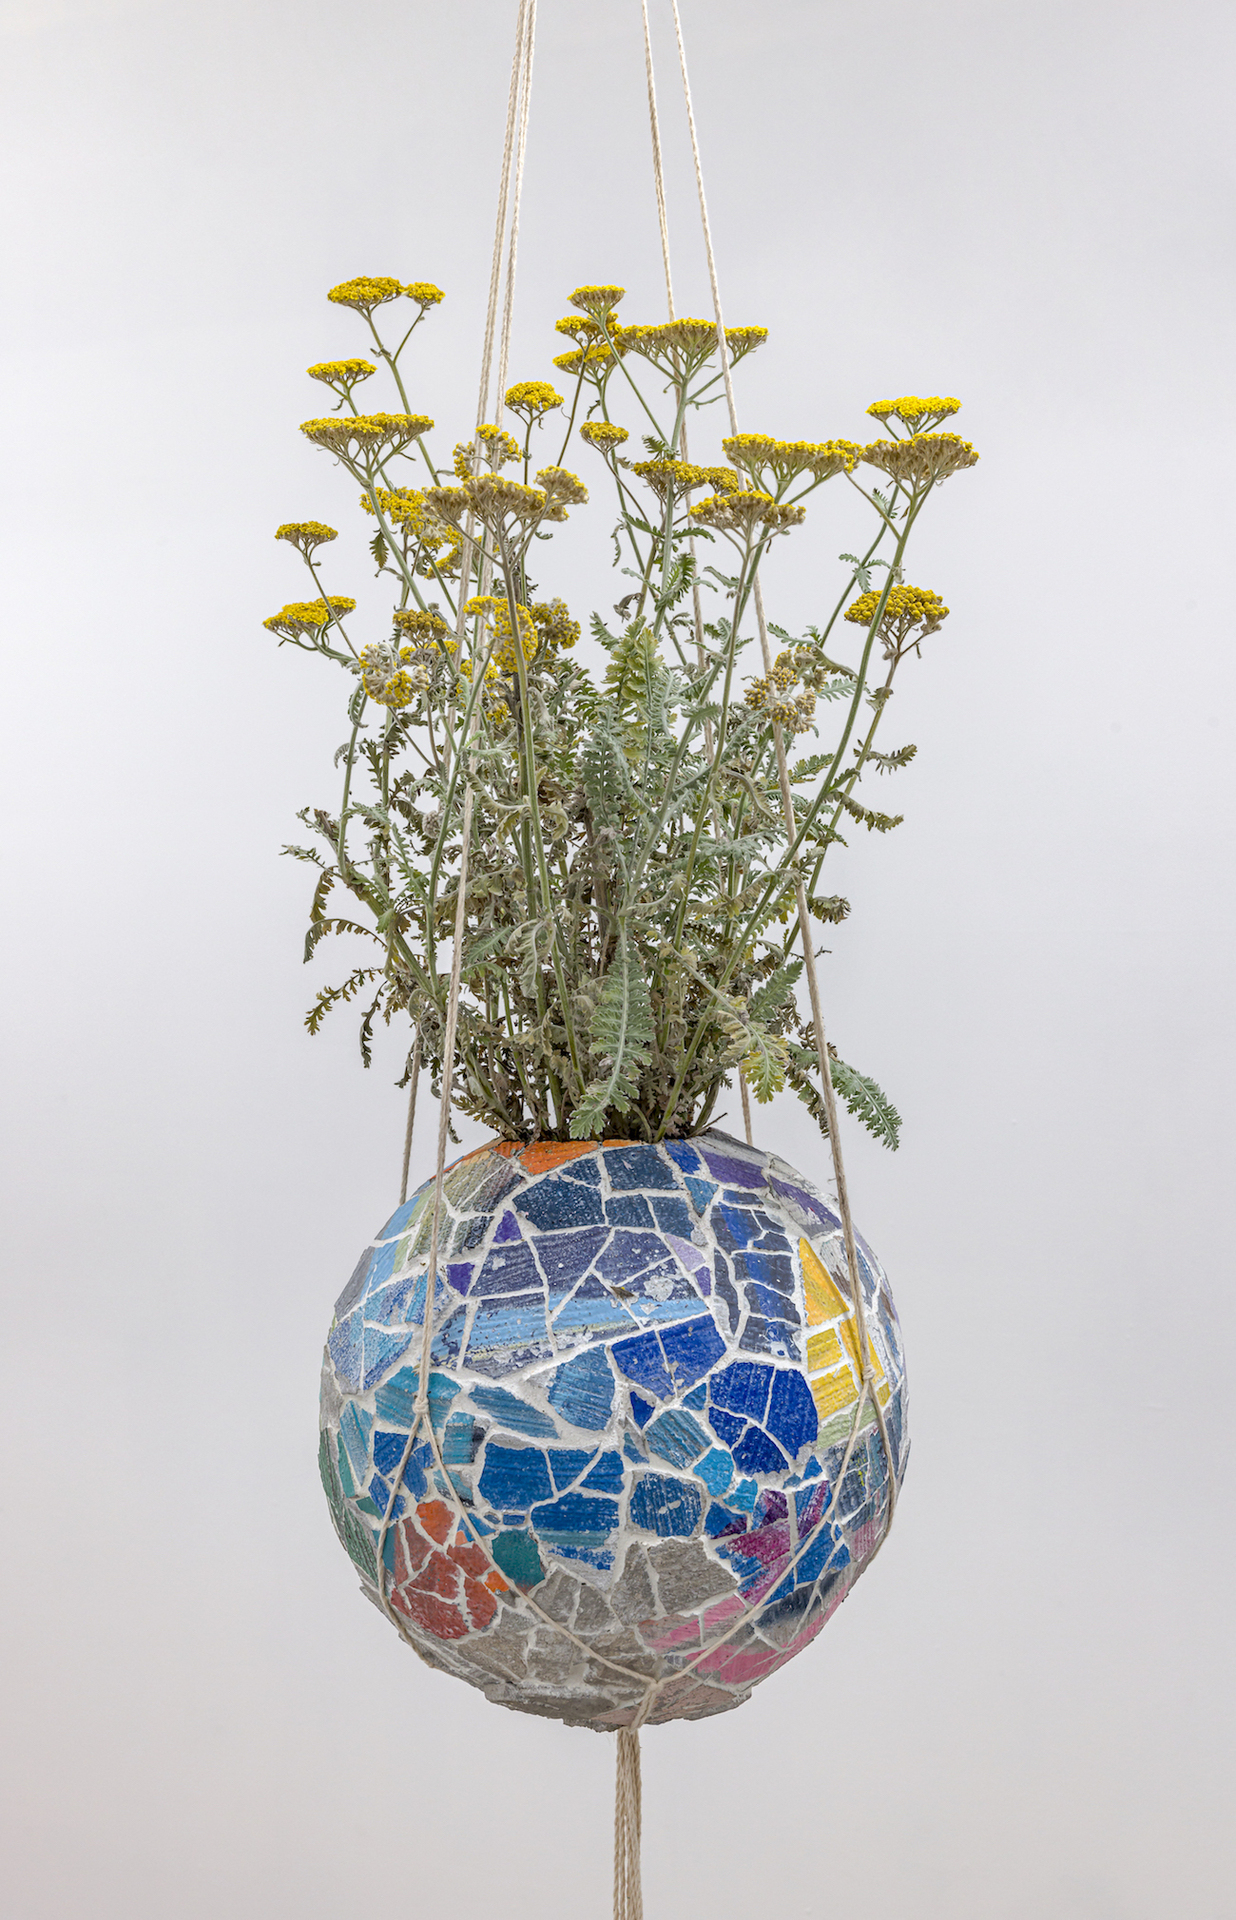 Mark Dudiak; "Regenerative Vessel”; 2021; Found mural fragments (spray paint on concrete), sanded grout, basketball, yarrow plant and cotton cord; 24” x 10” x 10” (planter); 96” x 10” x 10” (total sculpture)